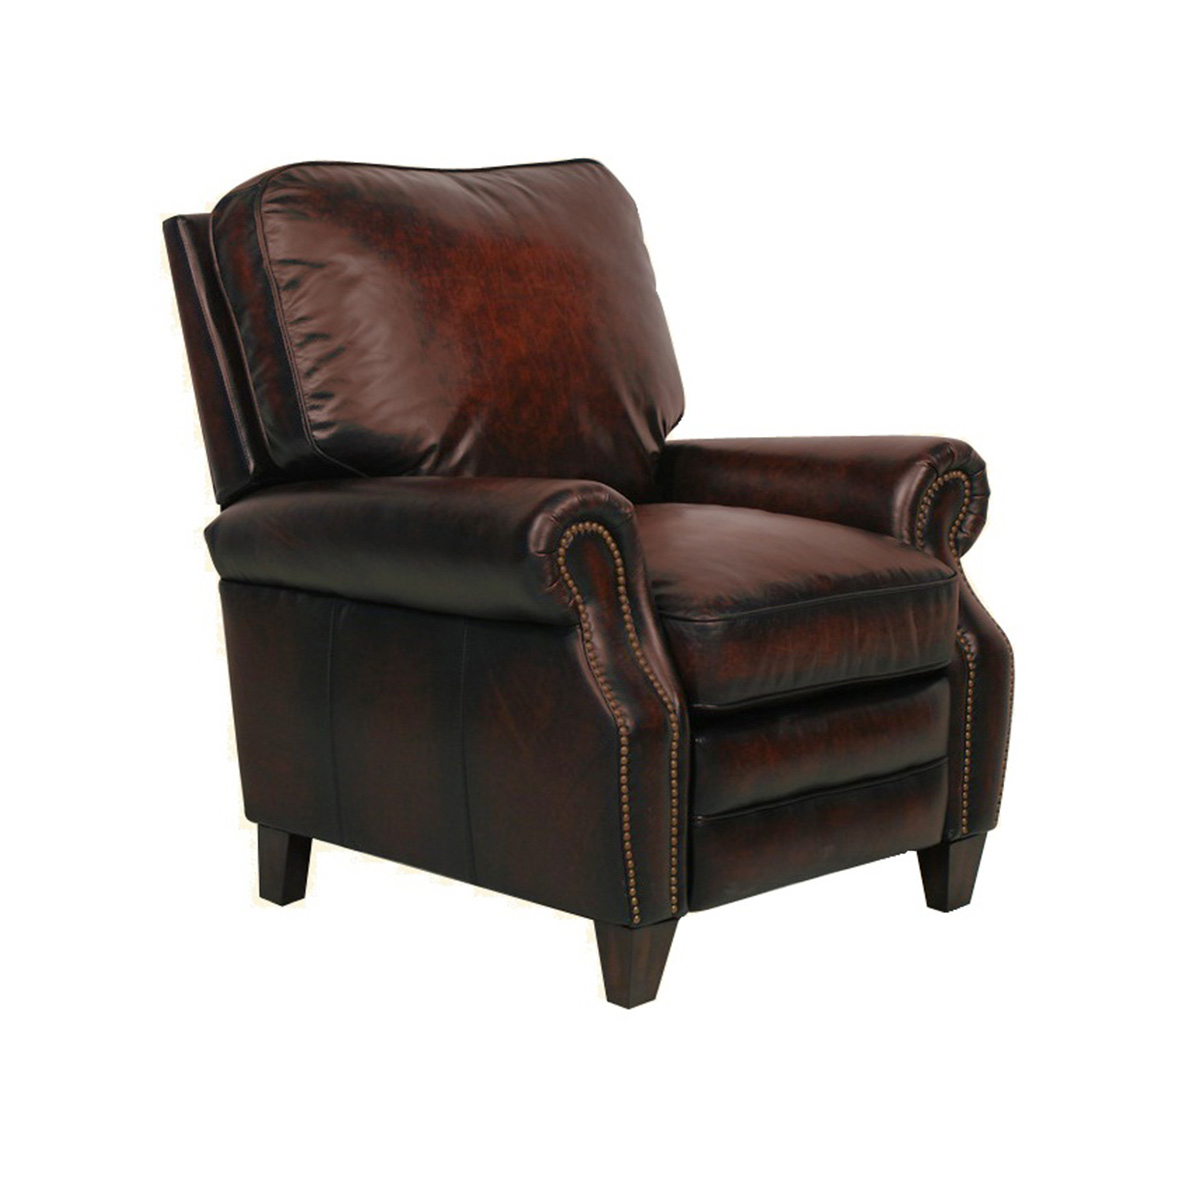 Barcalounger Briarwood Power Recliner Chair - Stetson Bordeaux/All Leather